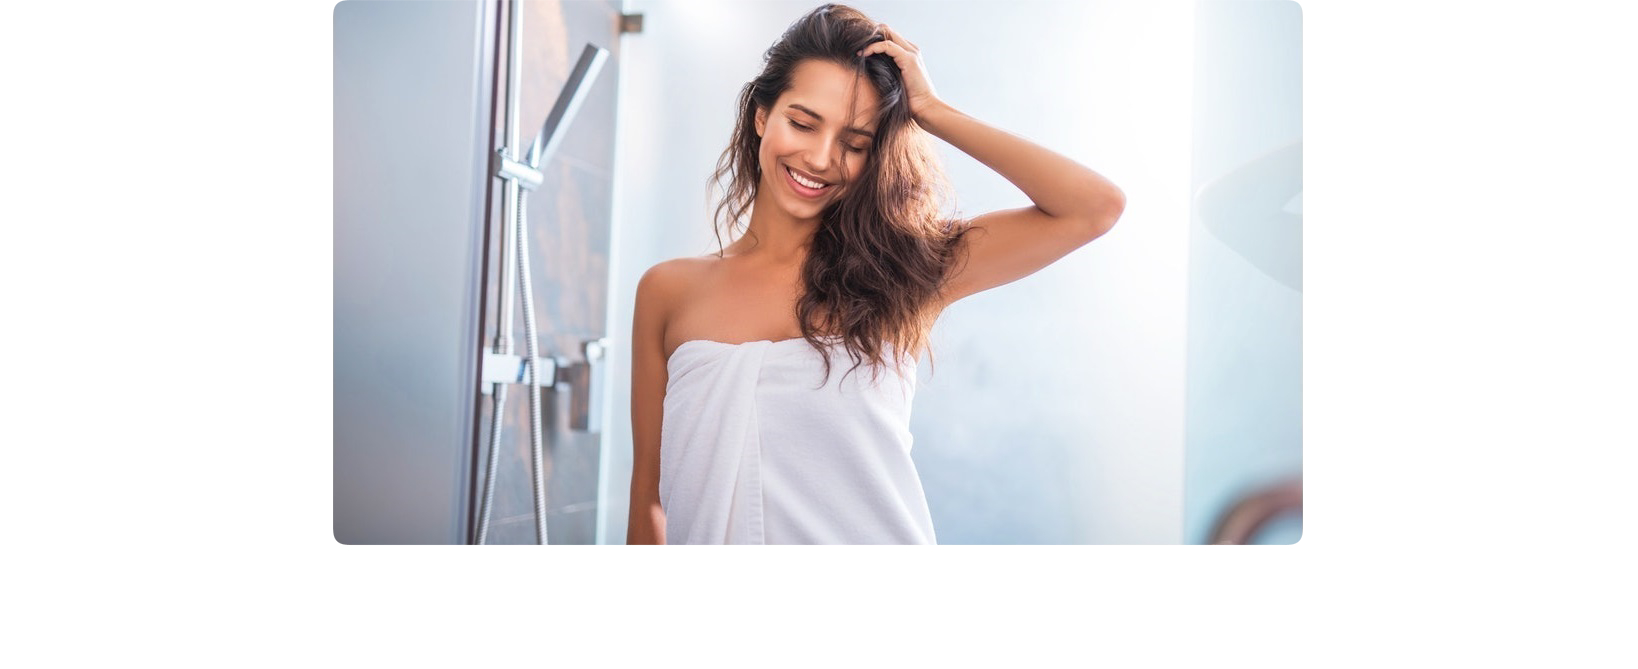 Smiling woman coming out of the shower wrapped in white towel